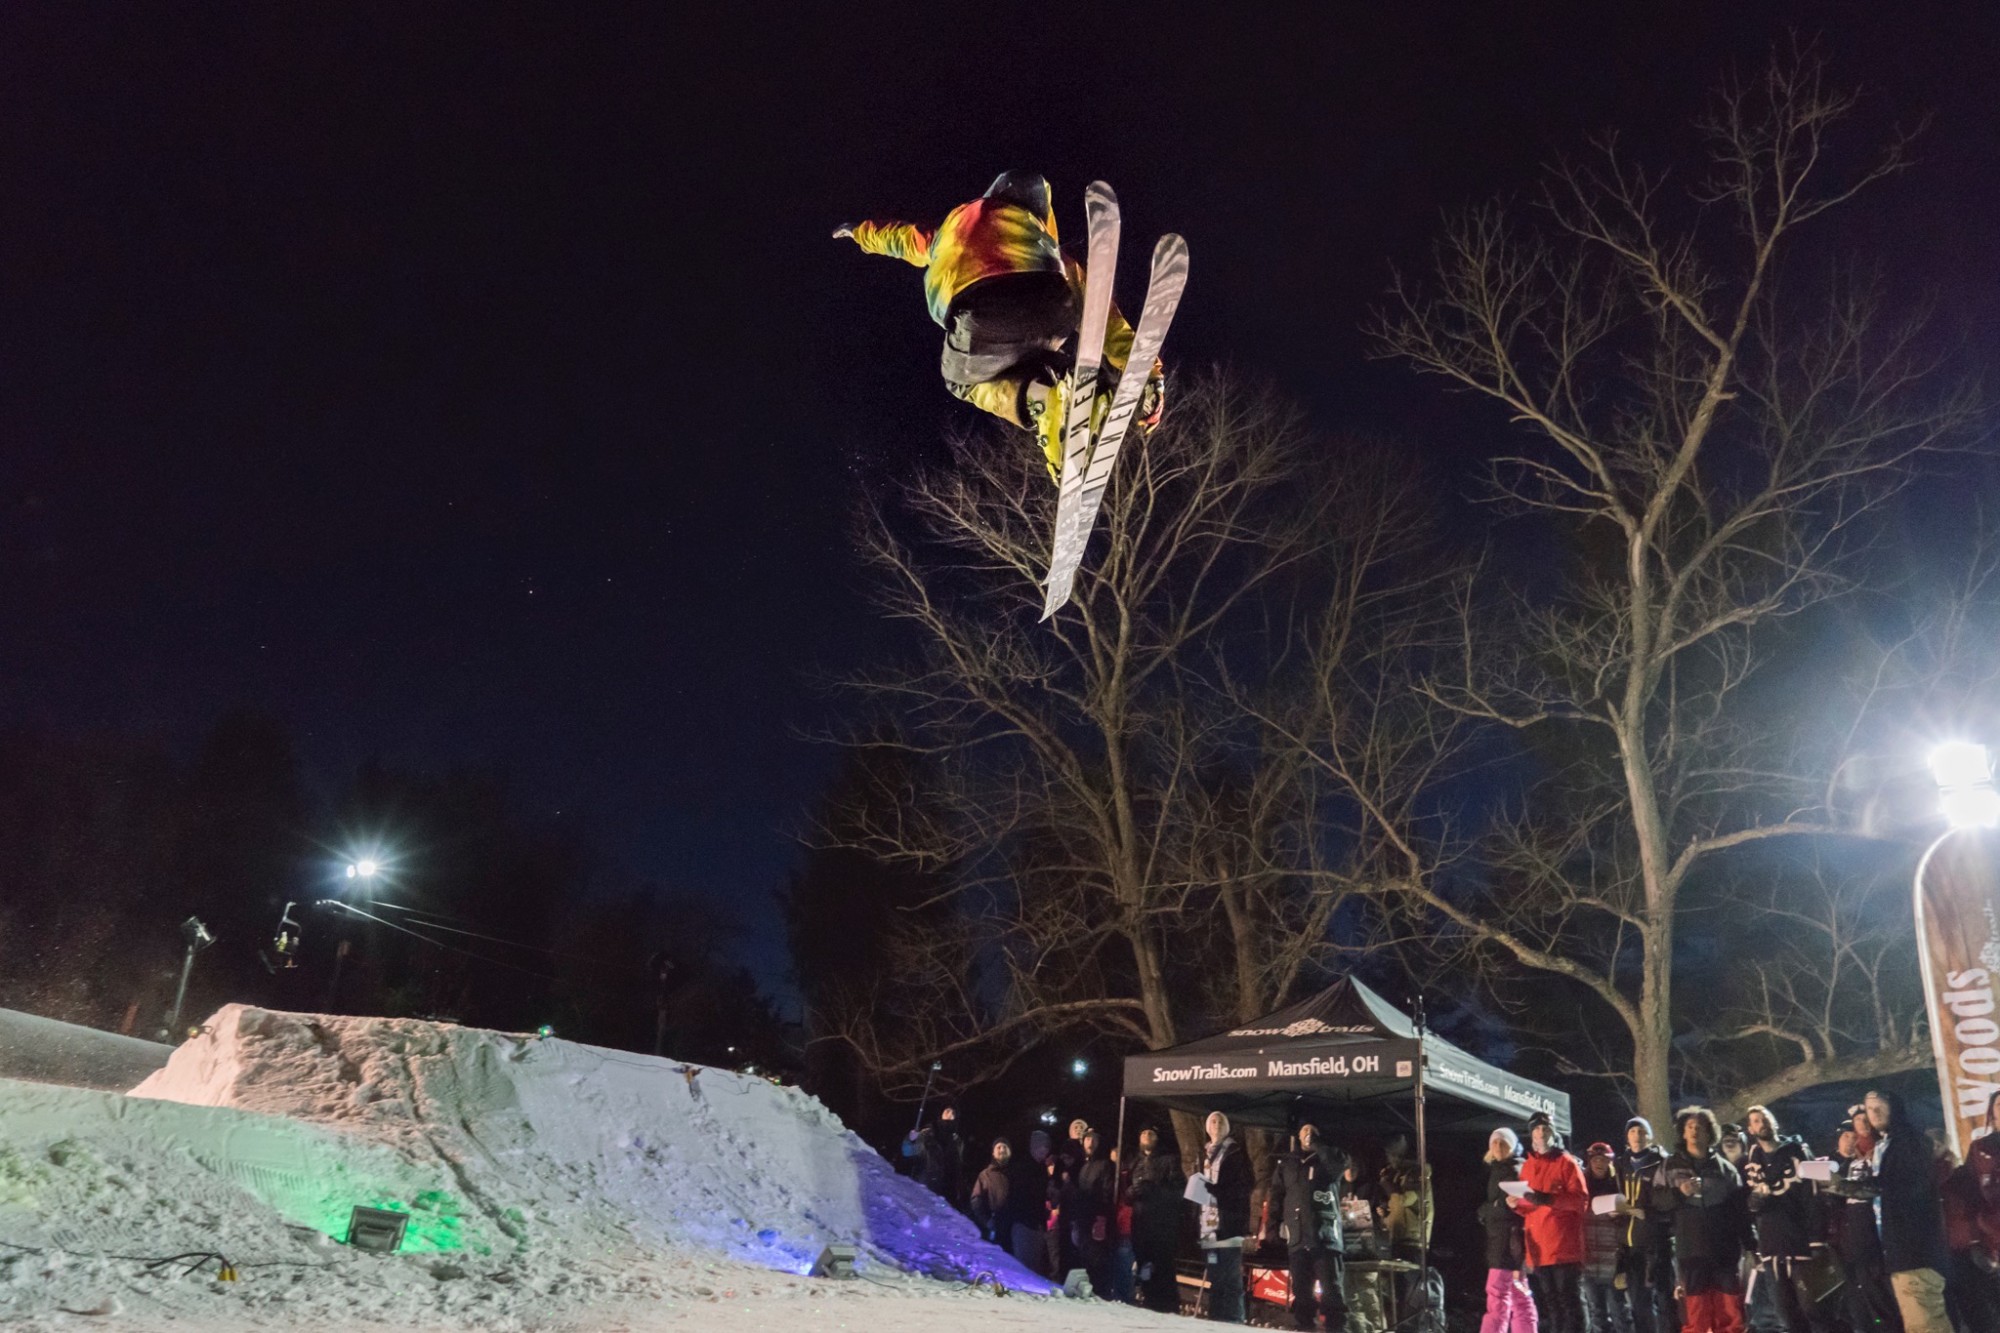 Big Air Competition Skier at Snow Trails in Mansfield Ohio